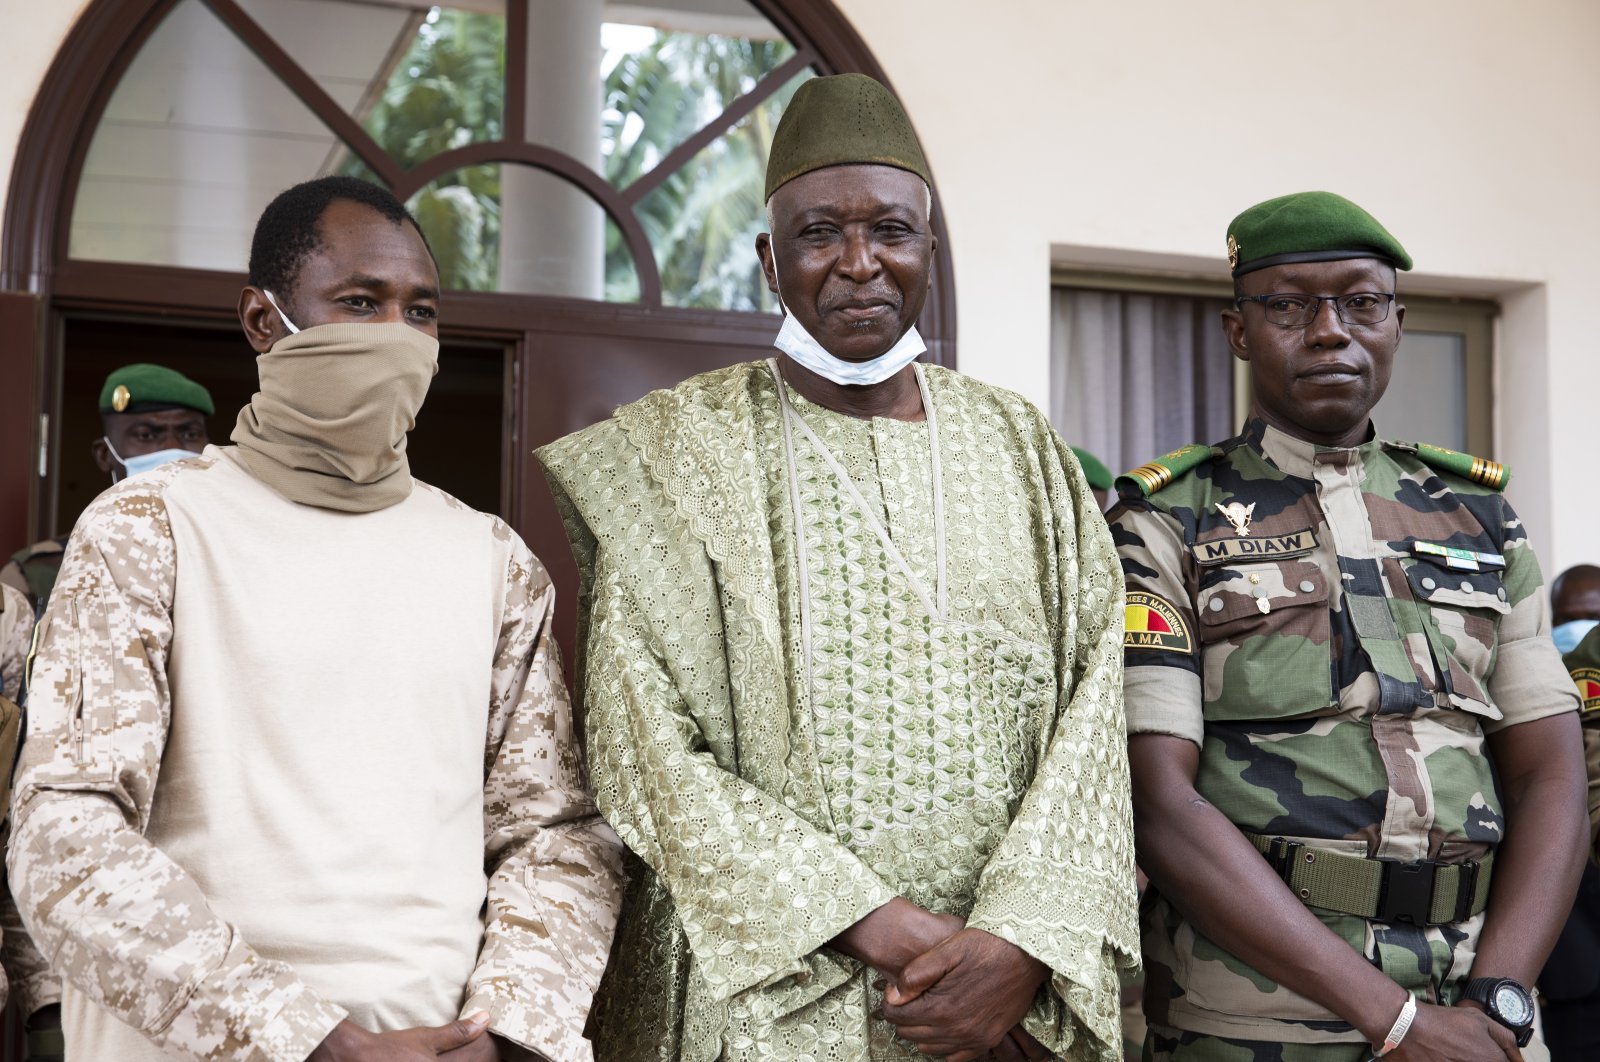 Mali junta leader and new transition vice president Col. Assimi Goita (L) with the new transition president, former defense minister Bah N'Daw (C), and Col. Malick Diaw (R) of the National Committee for the Salvation of the People (CNSP) pose for a photograph during a meeting with Economic Community Of West Africa (ECOWAS) in Bamako, Mali, Sept. 24, 2020. (EPA Photo)